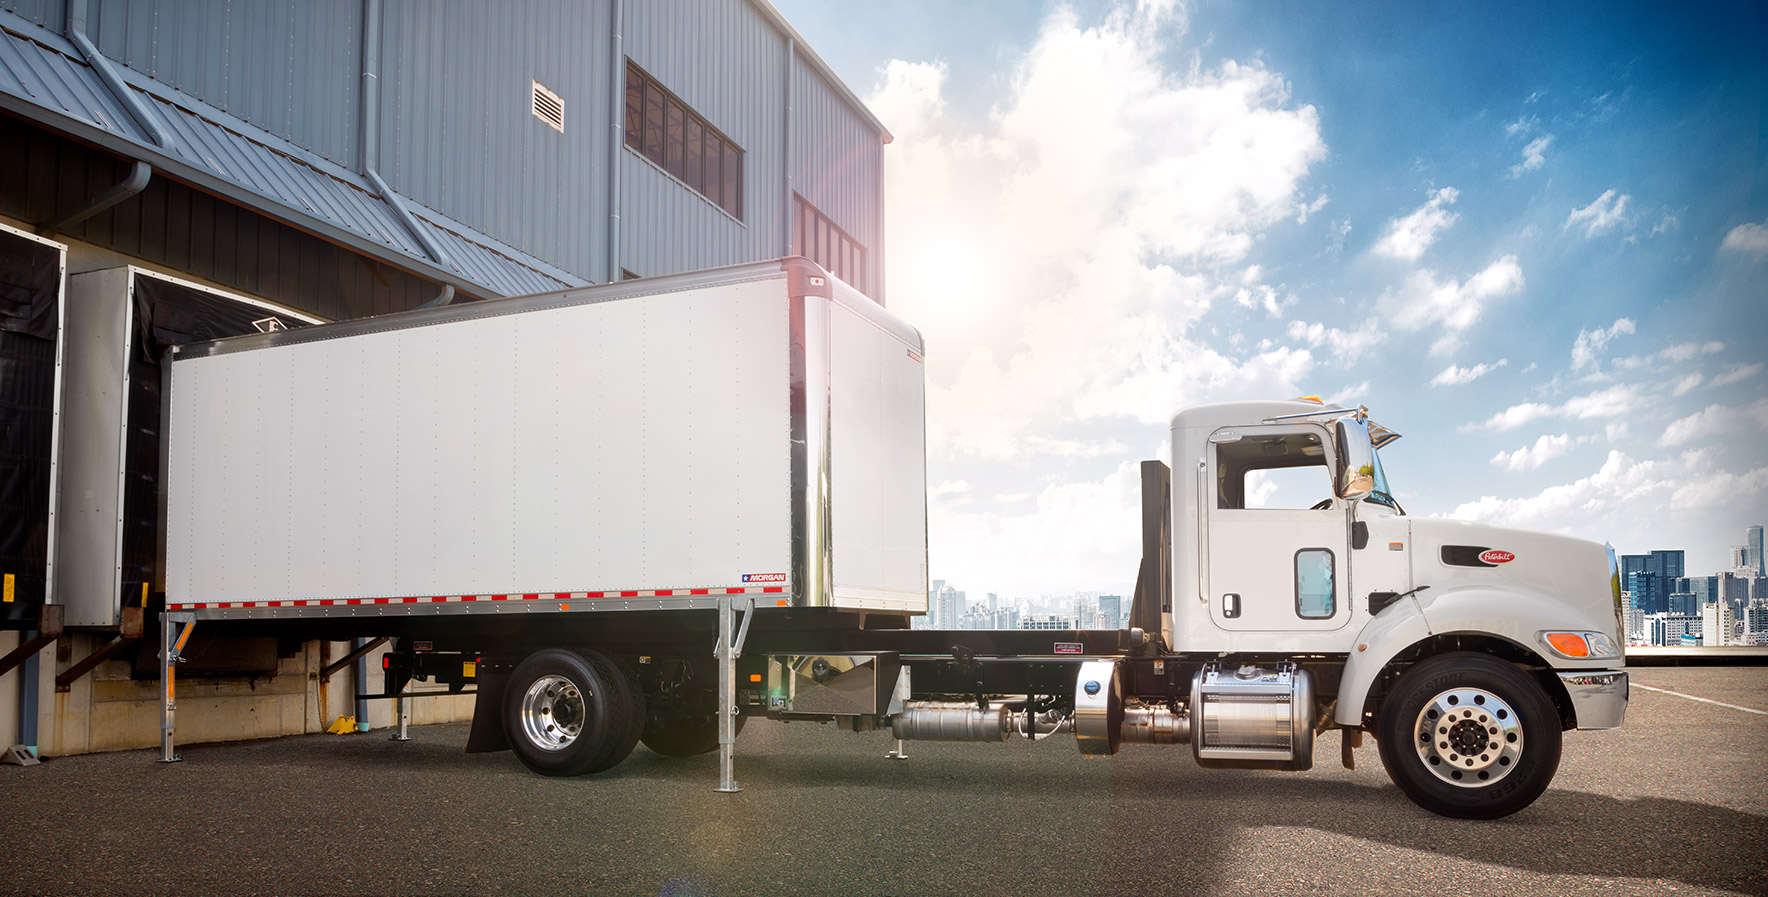 Demountable Concepts truck body detaching from chassis at loading dock